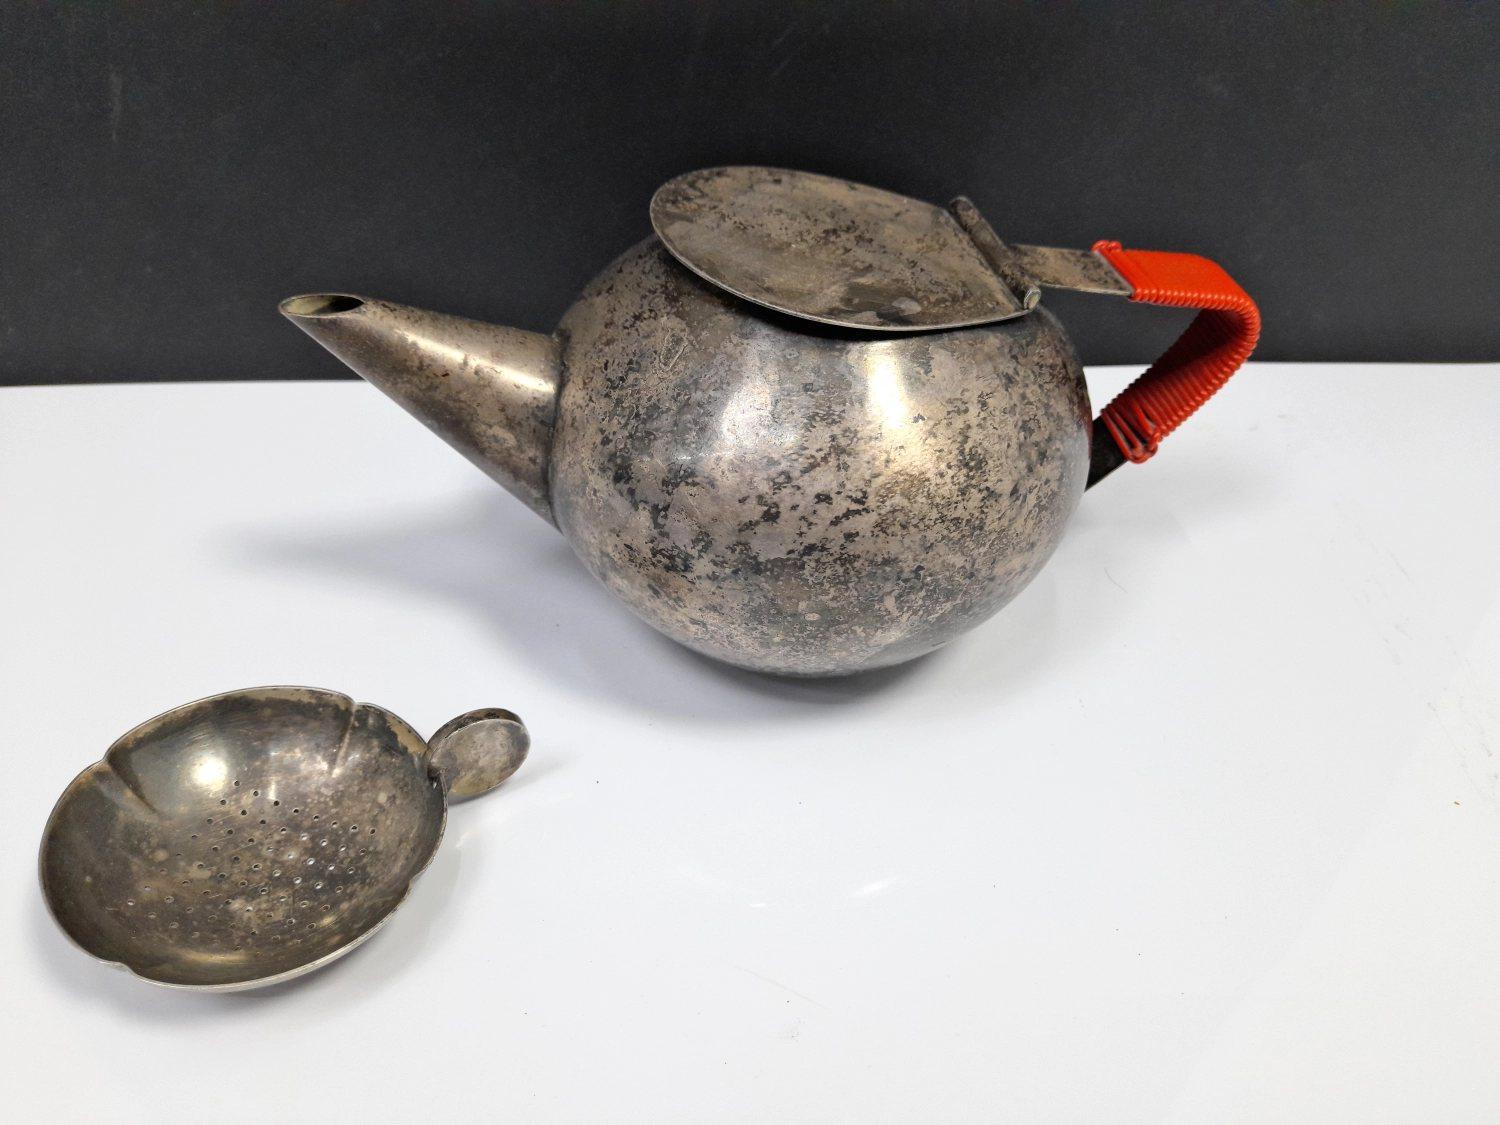 A rare silver plated marked Bauhaus tea pot and strainer from the iconic WMF manufactory in excellent condition.